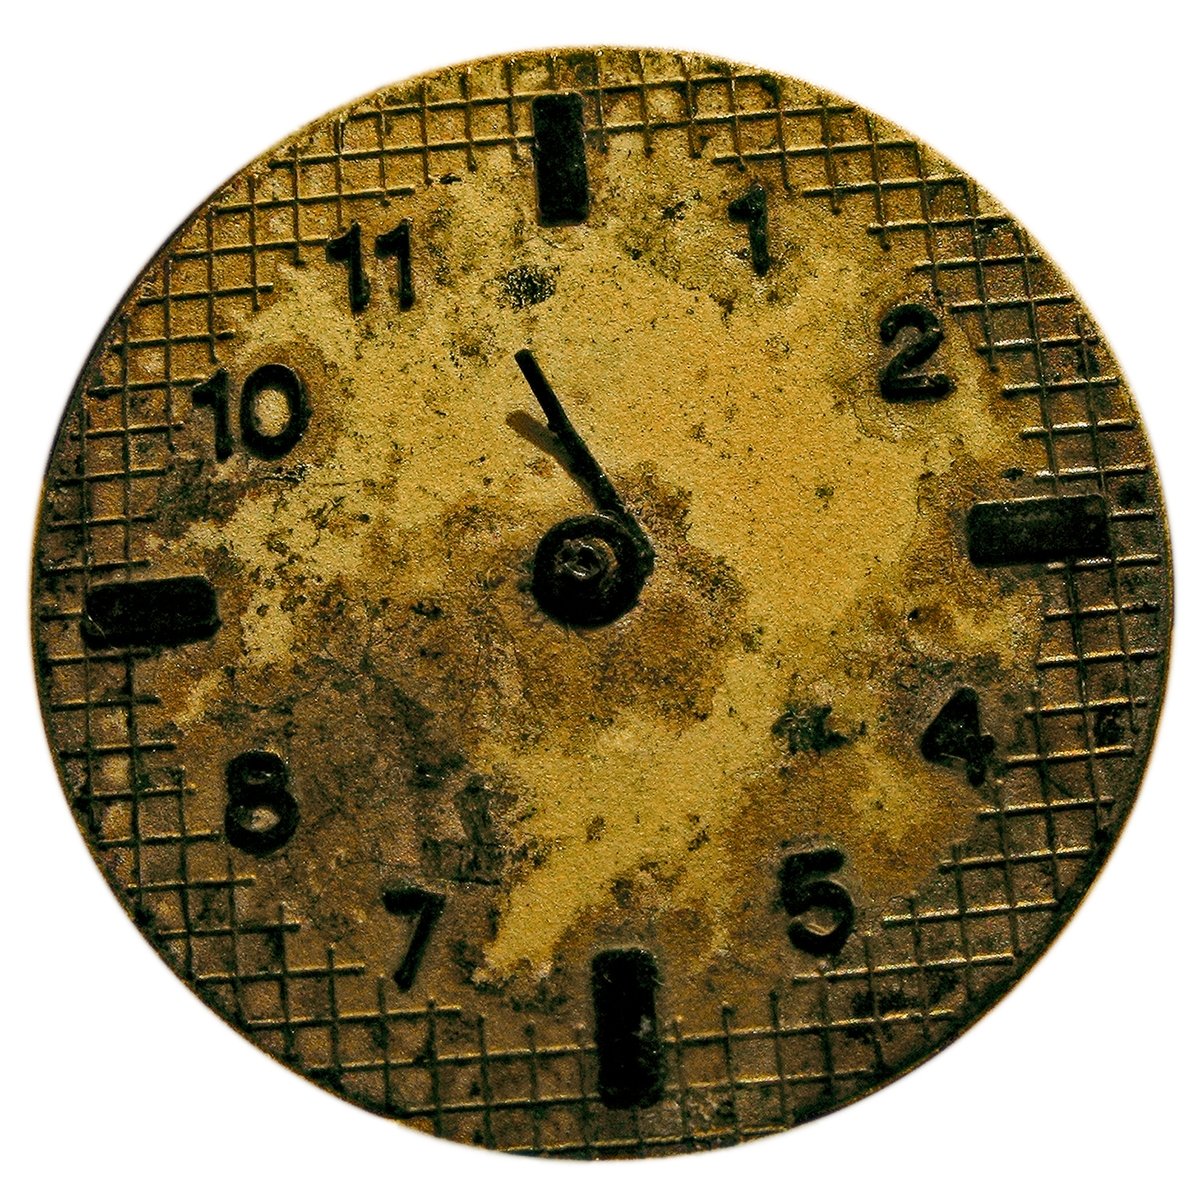 this is an image of an old looking clock